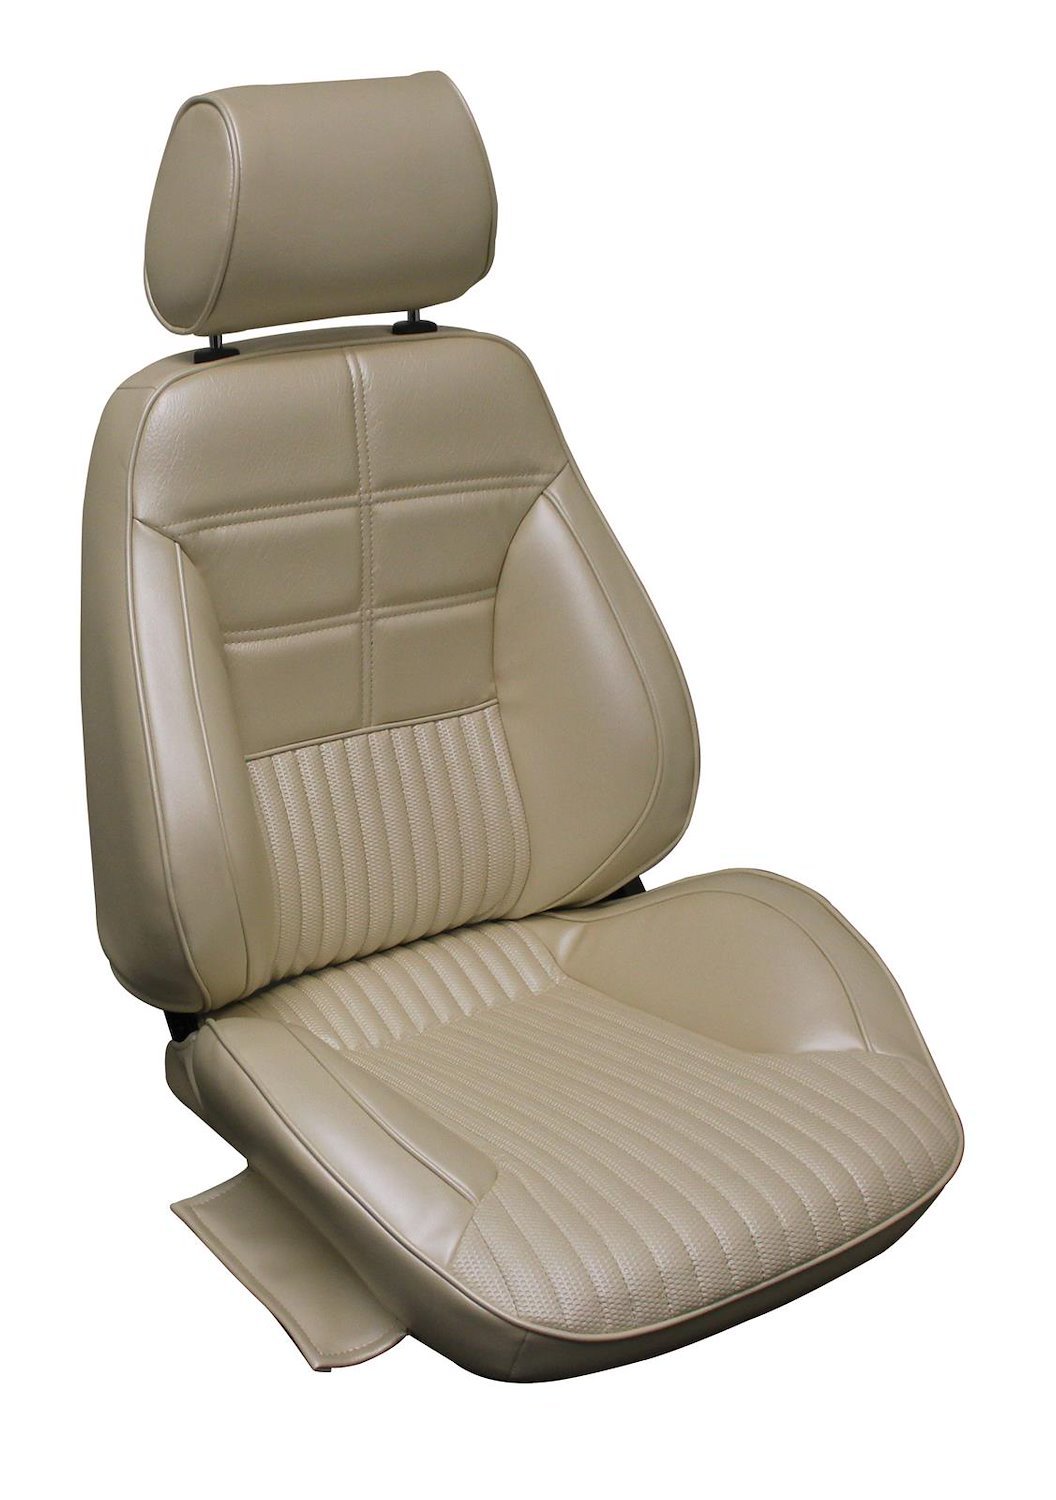 1970 Ford Mustang Deluxe and Grande Interior Touring II Preassembled Reclining Front Bucket Seats